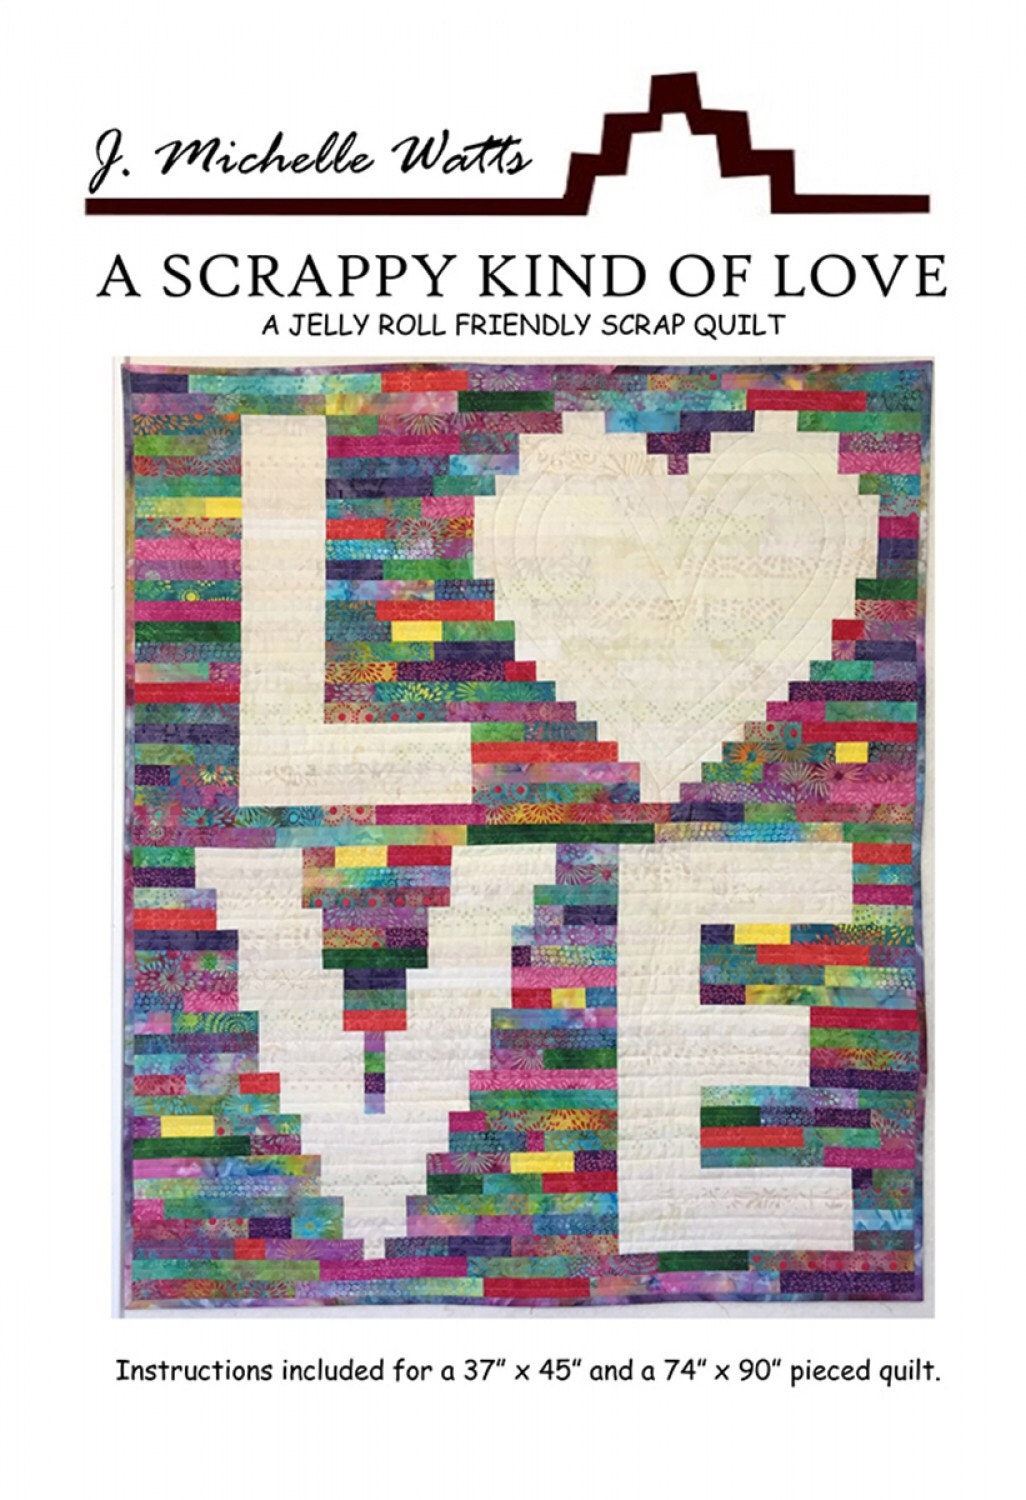 A Scrappy Kind of Love Quilt Pattern - J Michelle Watts Designs - Heart Quilt Pattern - Valentines Day Quilt Pattern - Jelly Roll Friendly